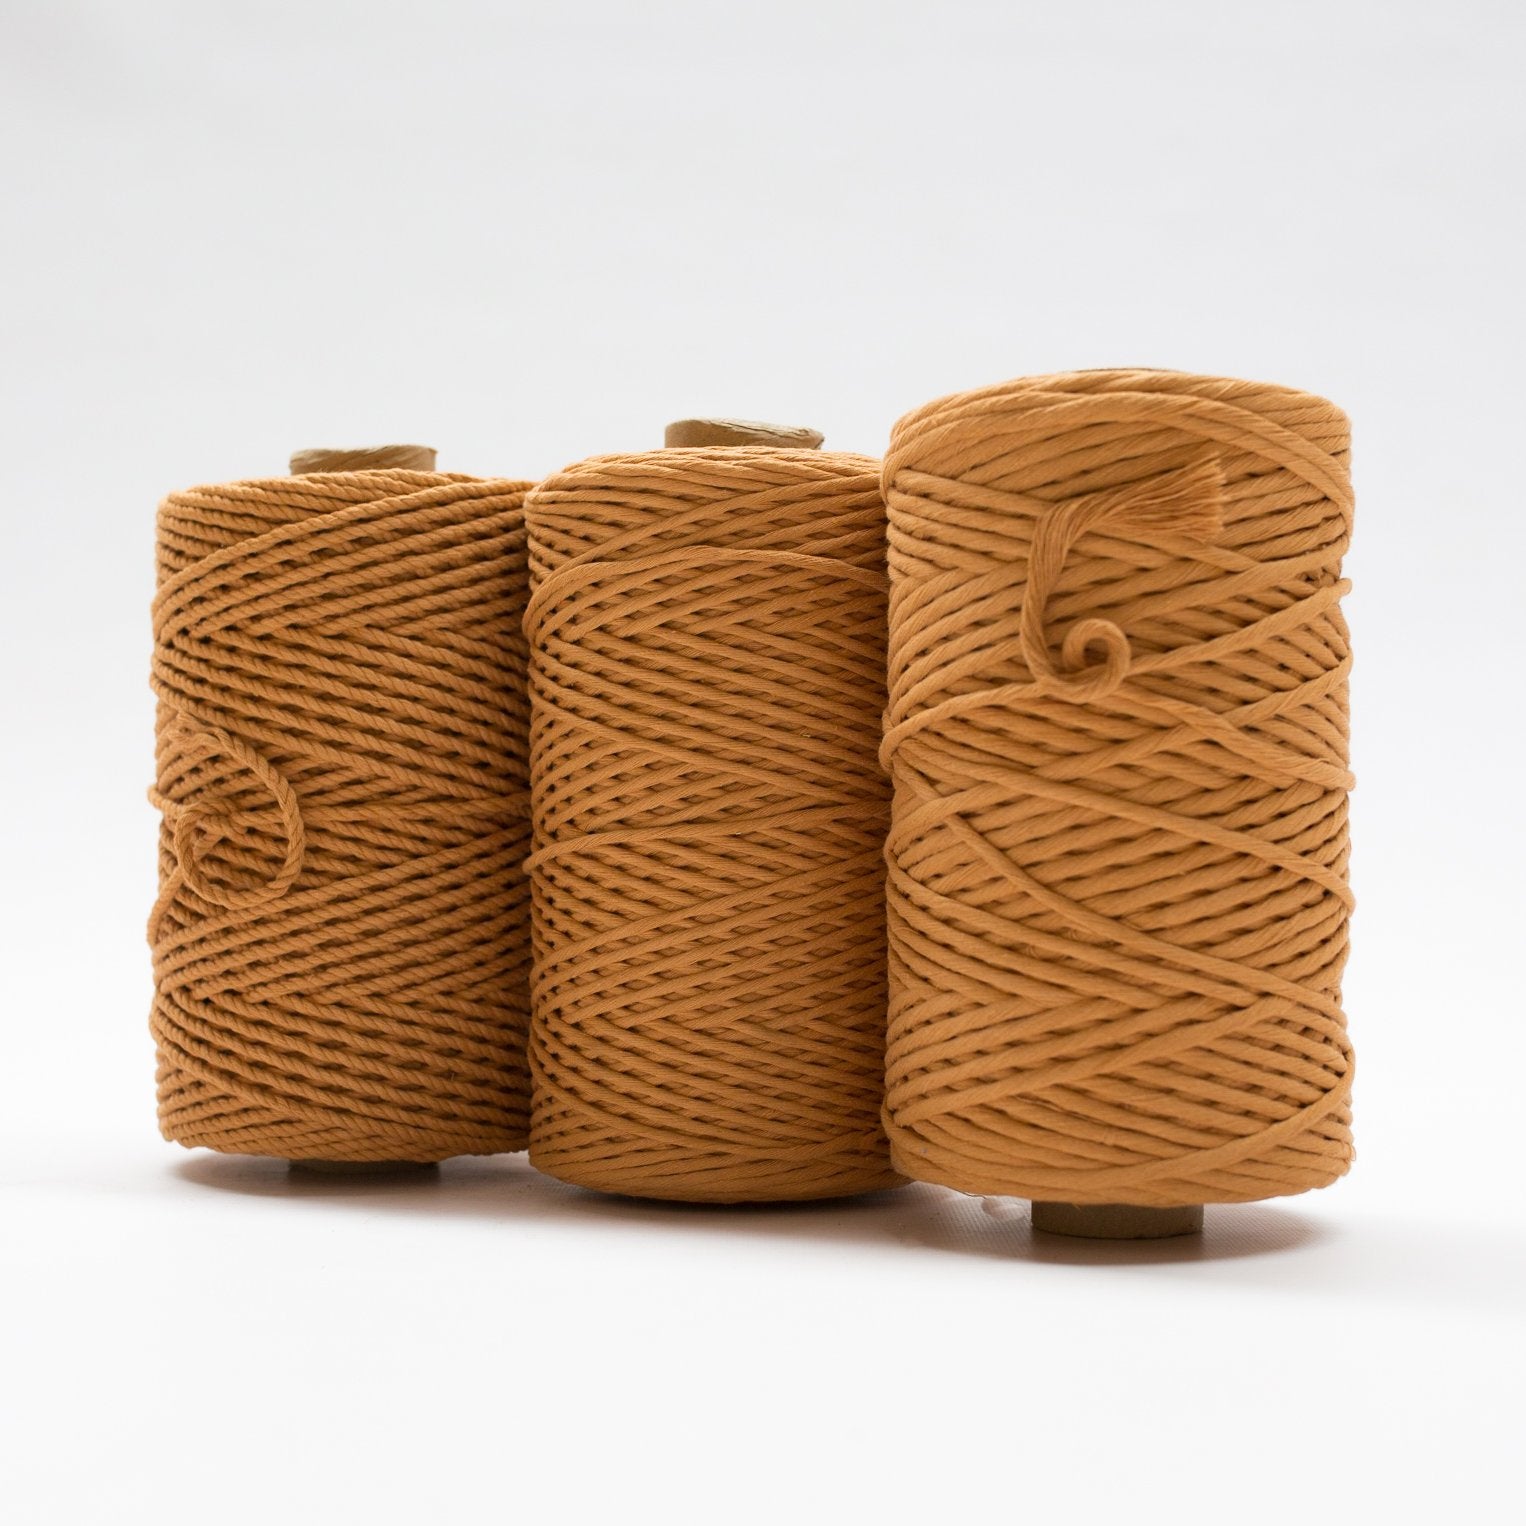 Mary Maker Studio Luxe Colour Cotton 4mm 1KG Recycled Luxe Macrame Rope // Sierra macrame cotton macrame rope macrame workshop macrame patterns macrame